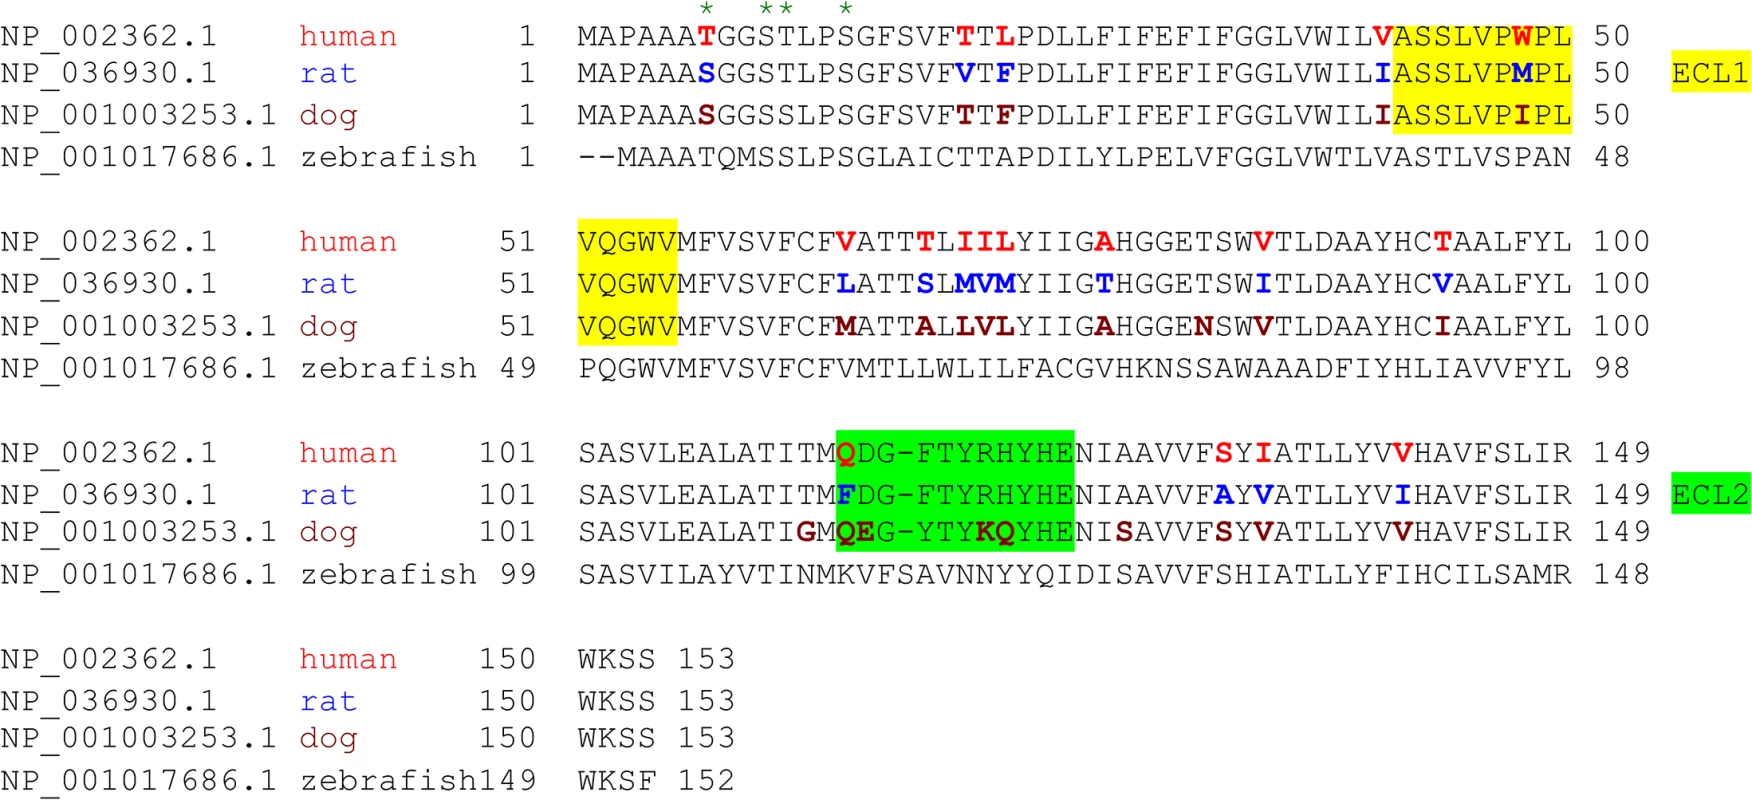 Species variation in the amino acid sequence of MAL.